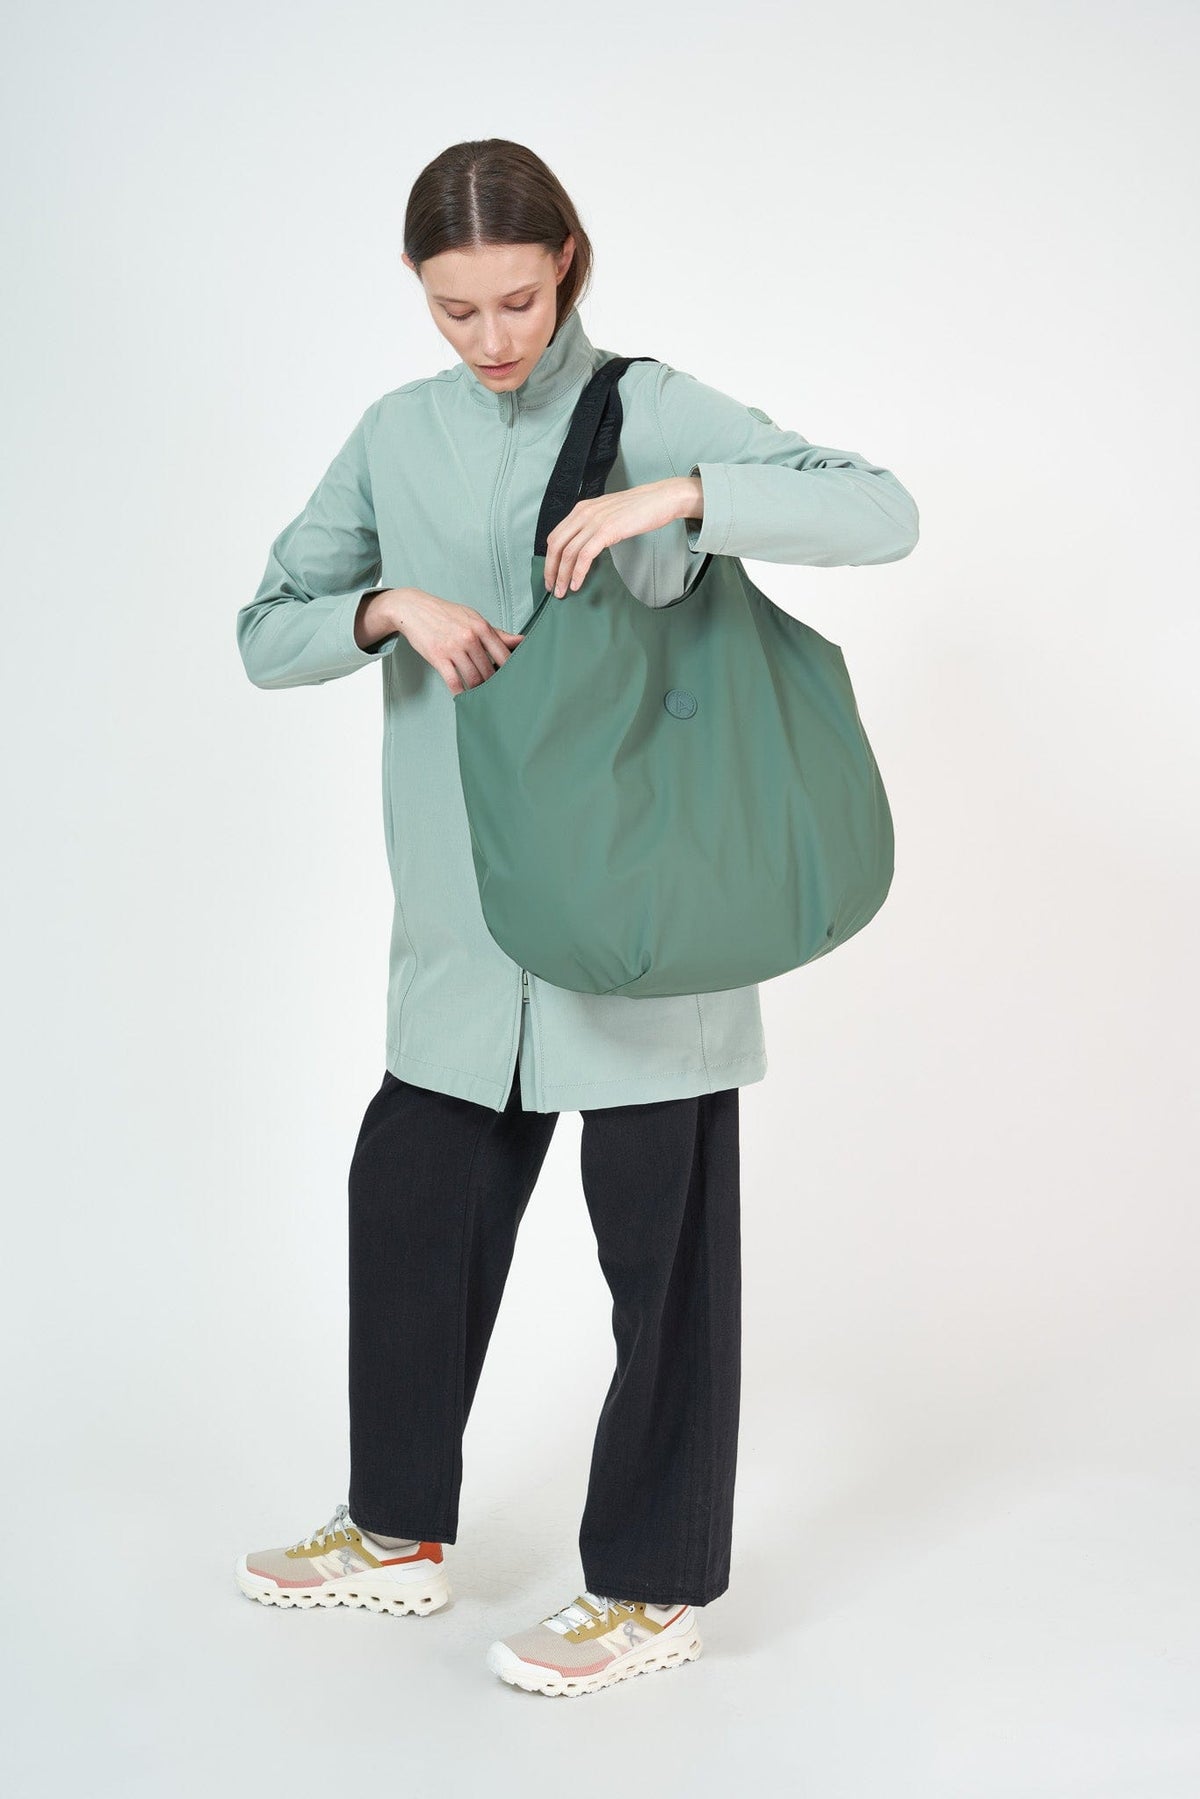 TANTÄ Waterproof Rounded Shopper Bag